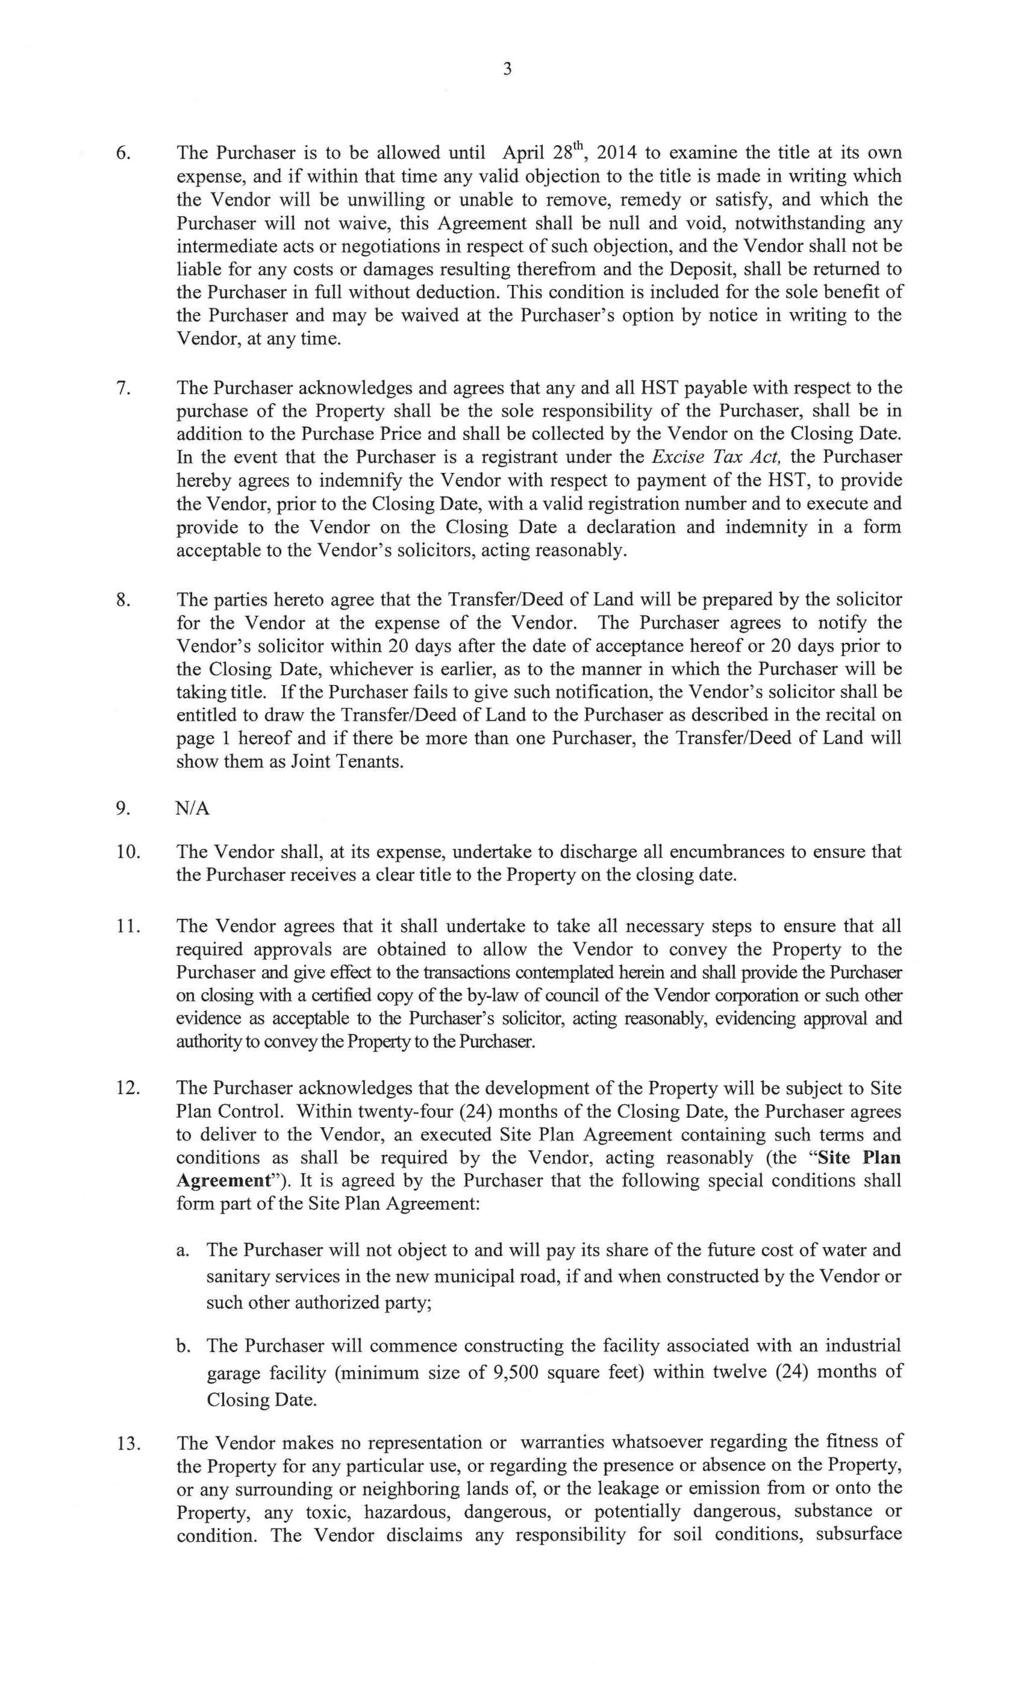 3 6. The Purchaser is to be allowed until April 28'\ 2014 to examine the title at its own expense, and if within that time any valid objection to the title is made in writing which the Vendor will be